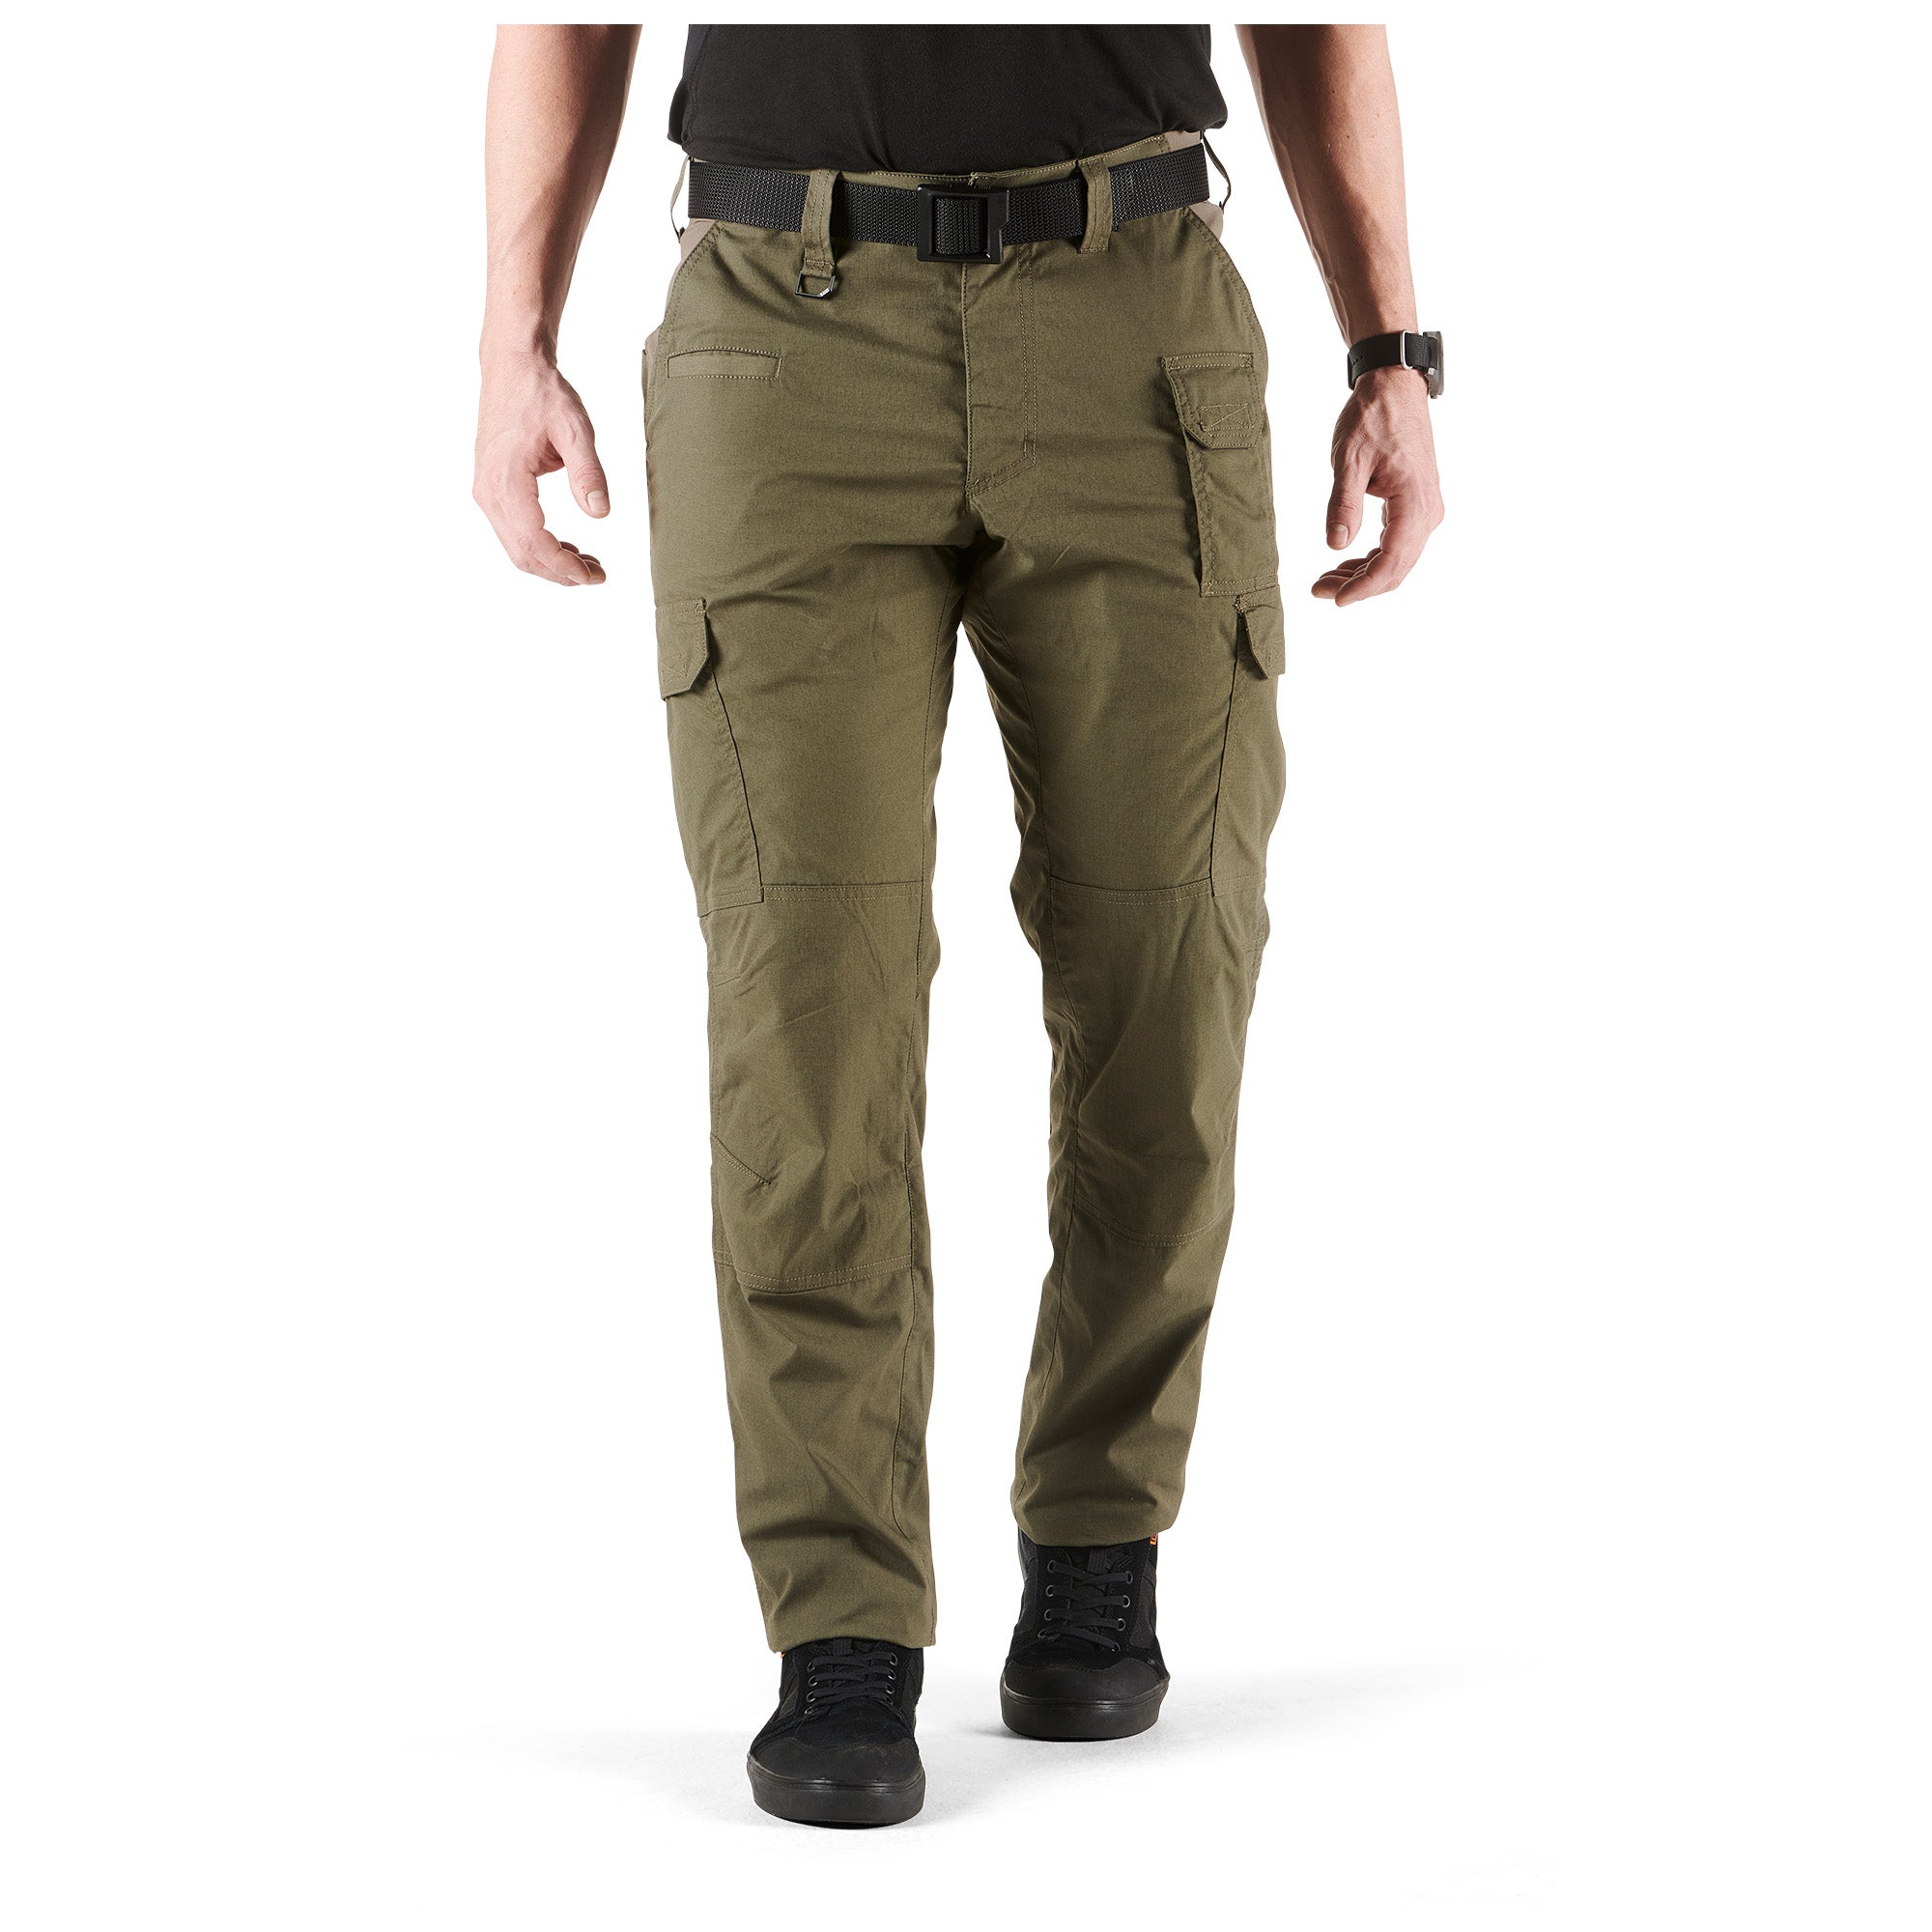 5.11® Tactical Men's ABR™ Pro Ripstop Tactical Pant_Ranger Green - Work World - Workwear, Work Boots, Safety Gear